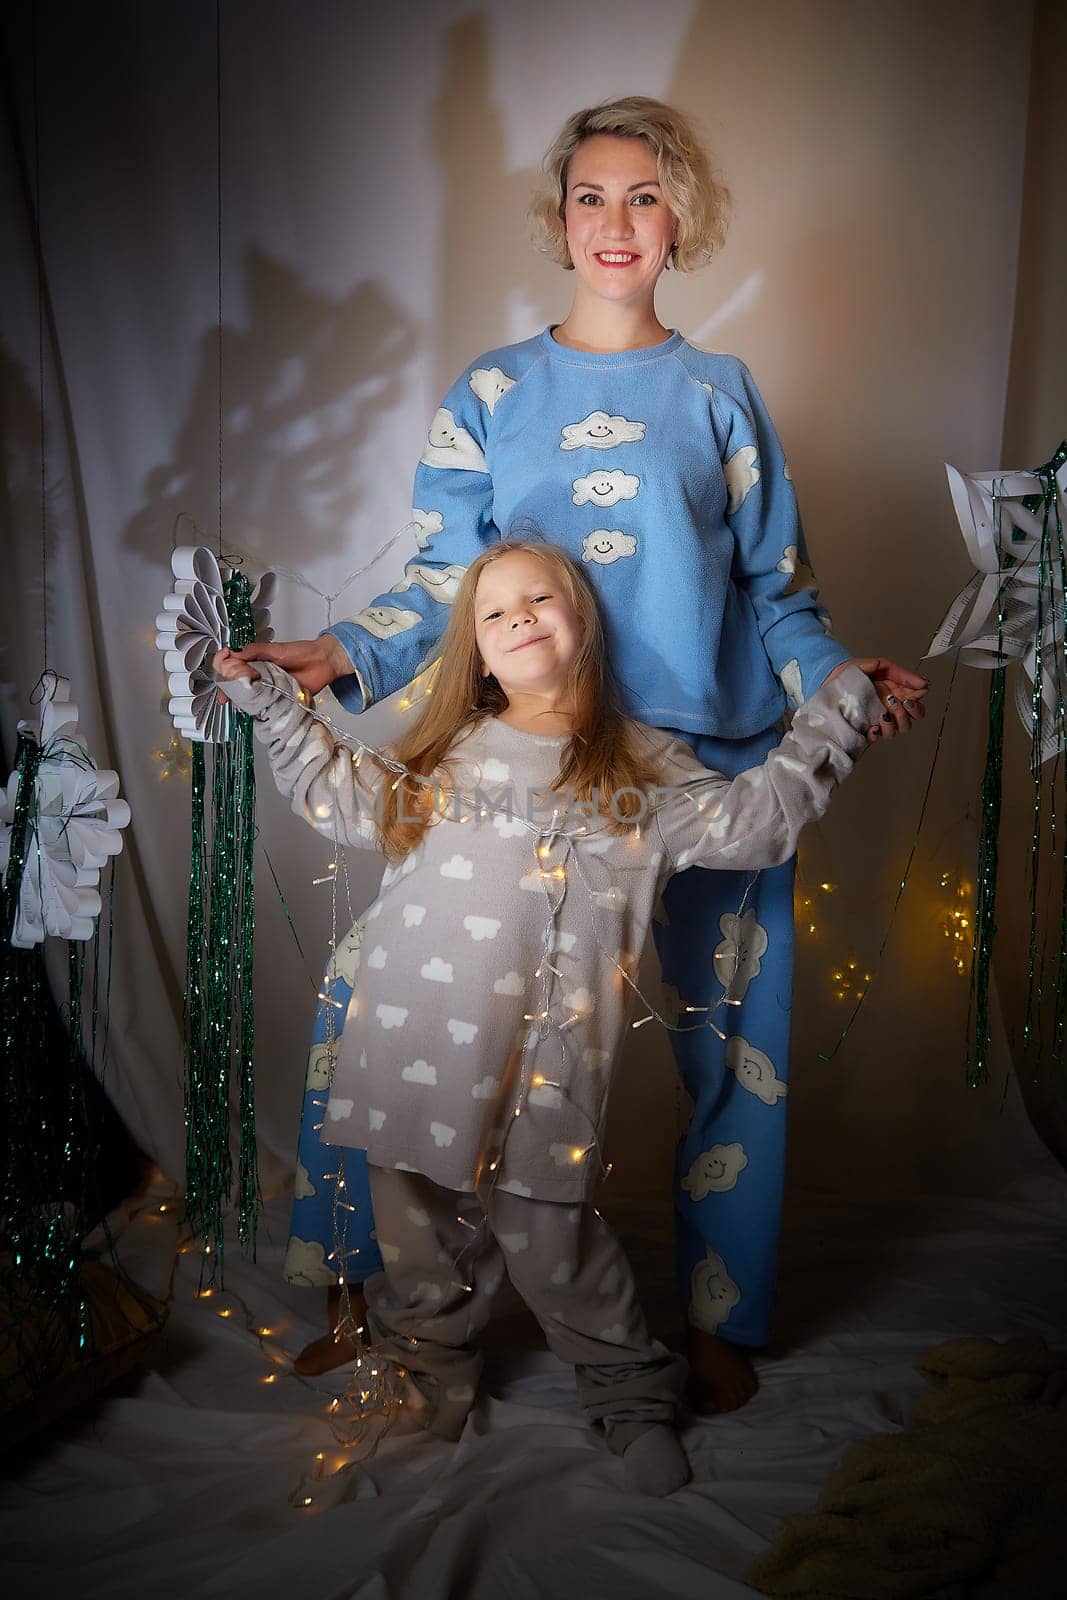 Cute mother and daughter in pajamas having fun in the room with Christmas garlands and white background. The tradition of decorating the house for holidays. Happy childhood and motherhood